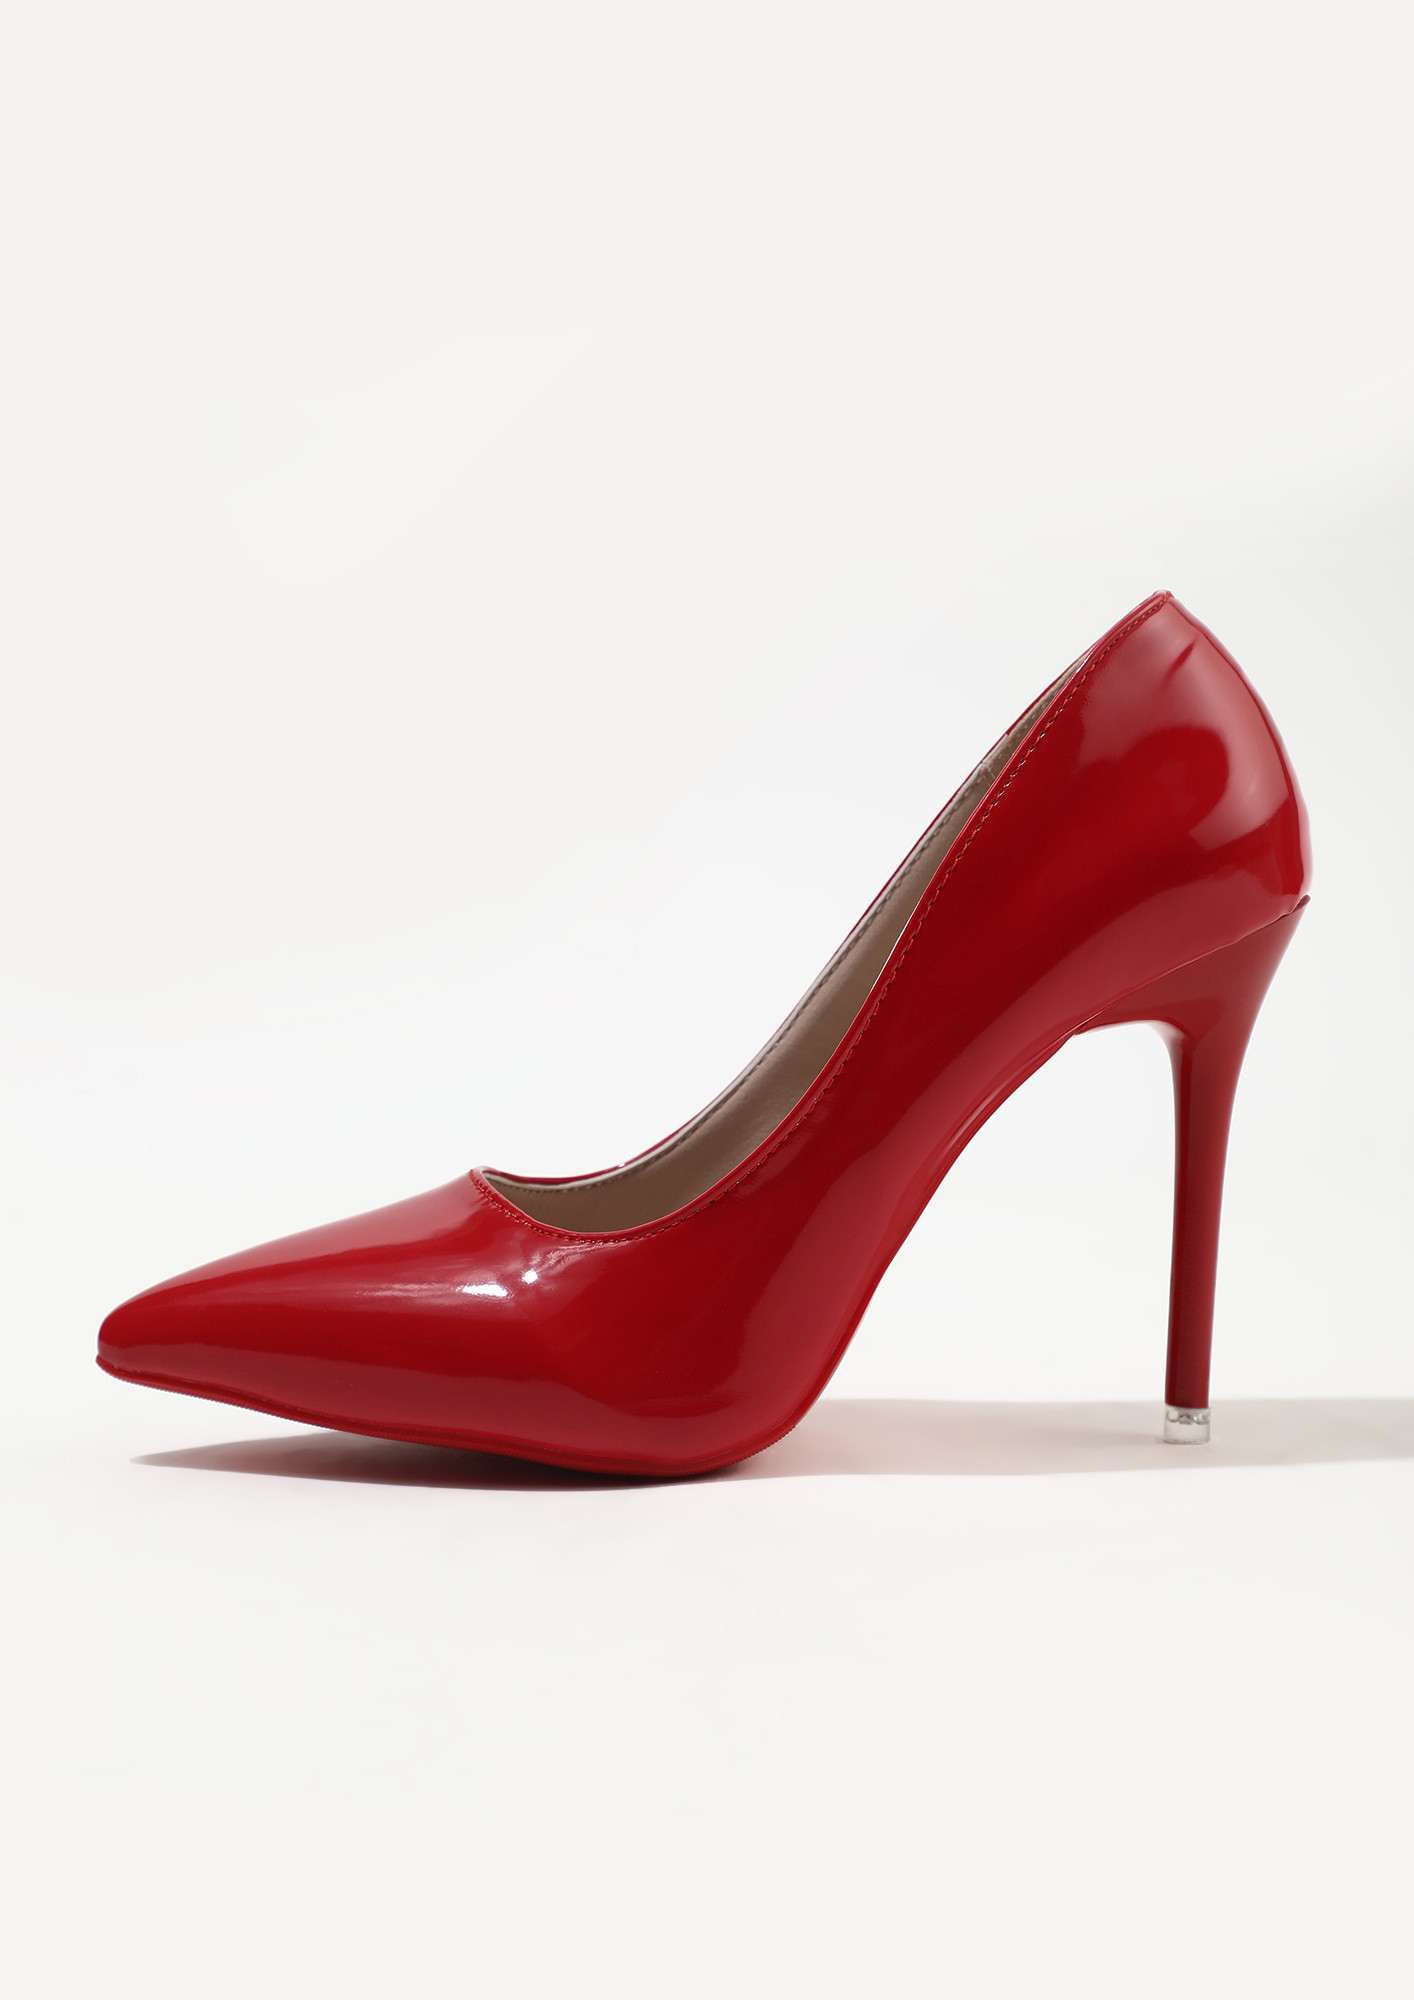 Red Patent Leather Pump - Comfortable Heels - Ally Shoes